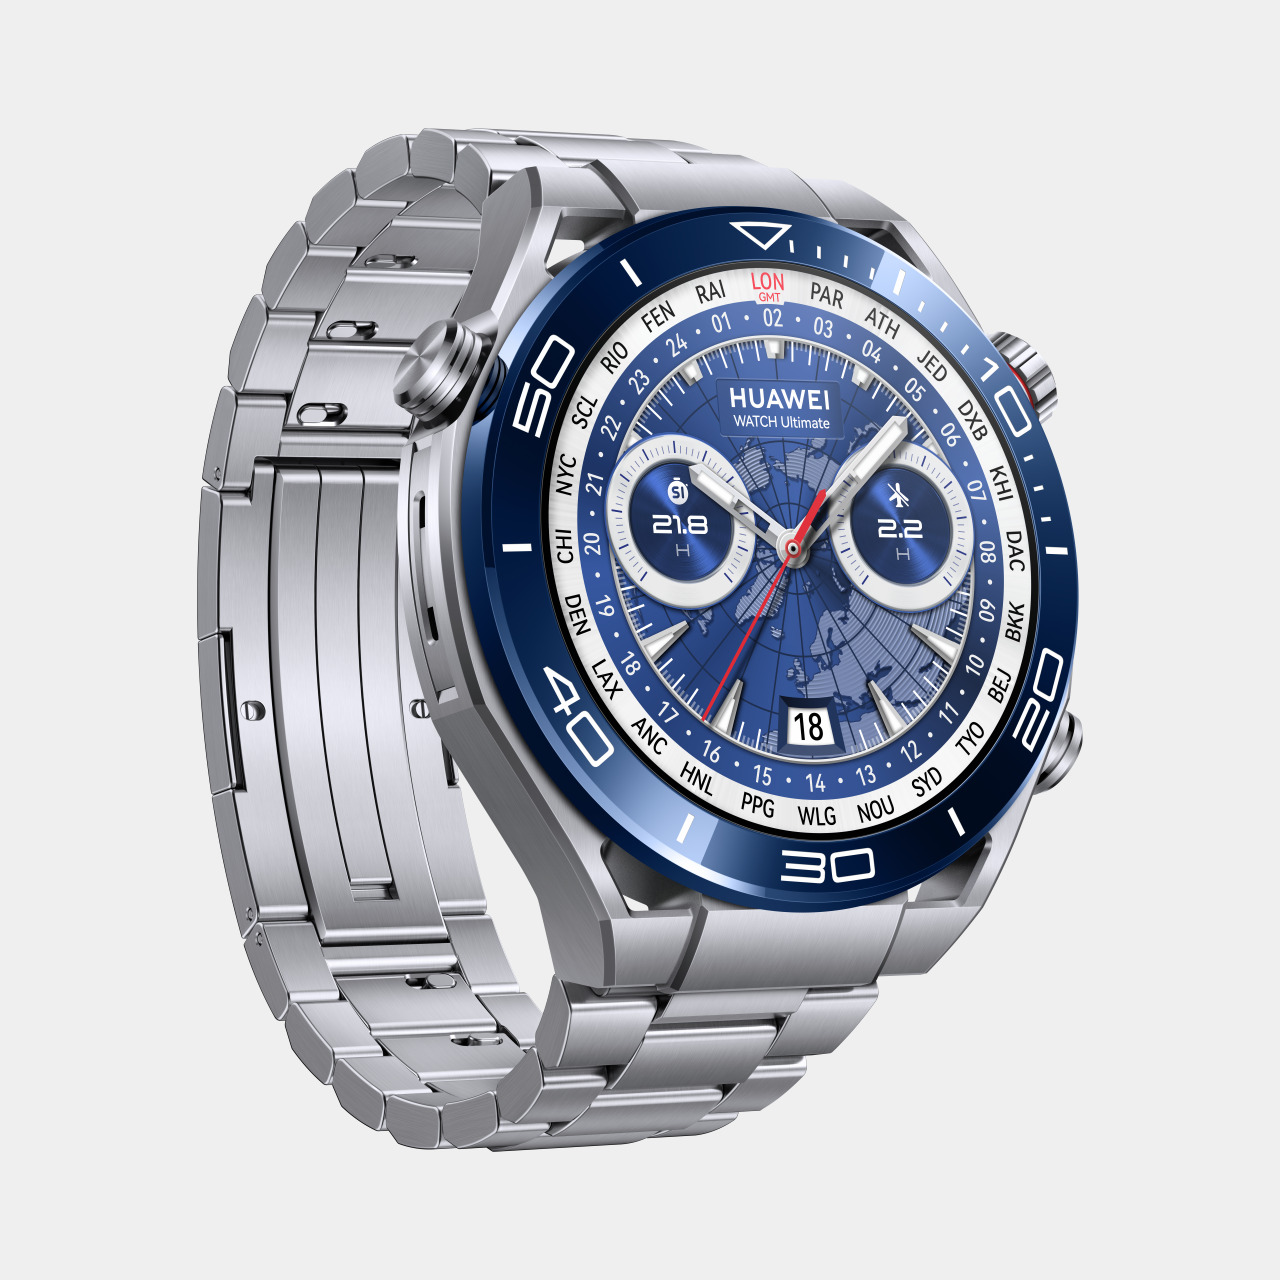 Huawei WATCH Ultimate offers luxury you can bring with you everywhere